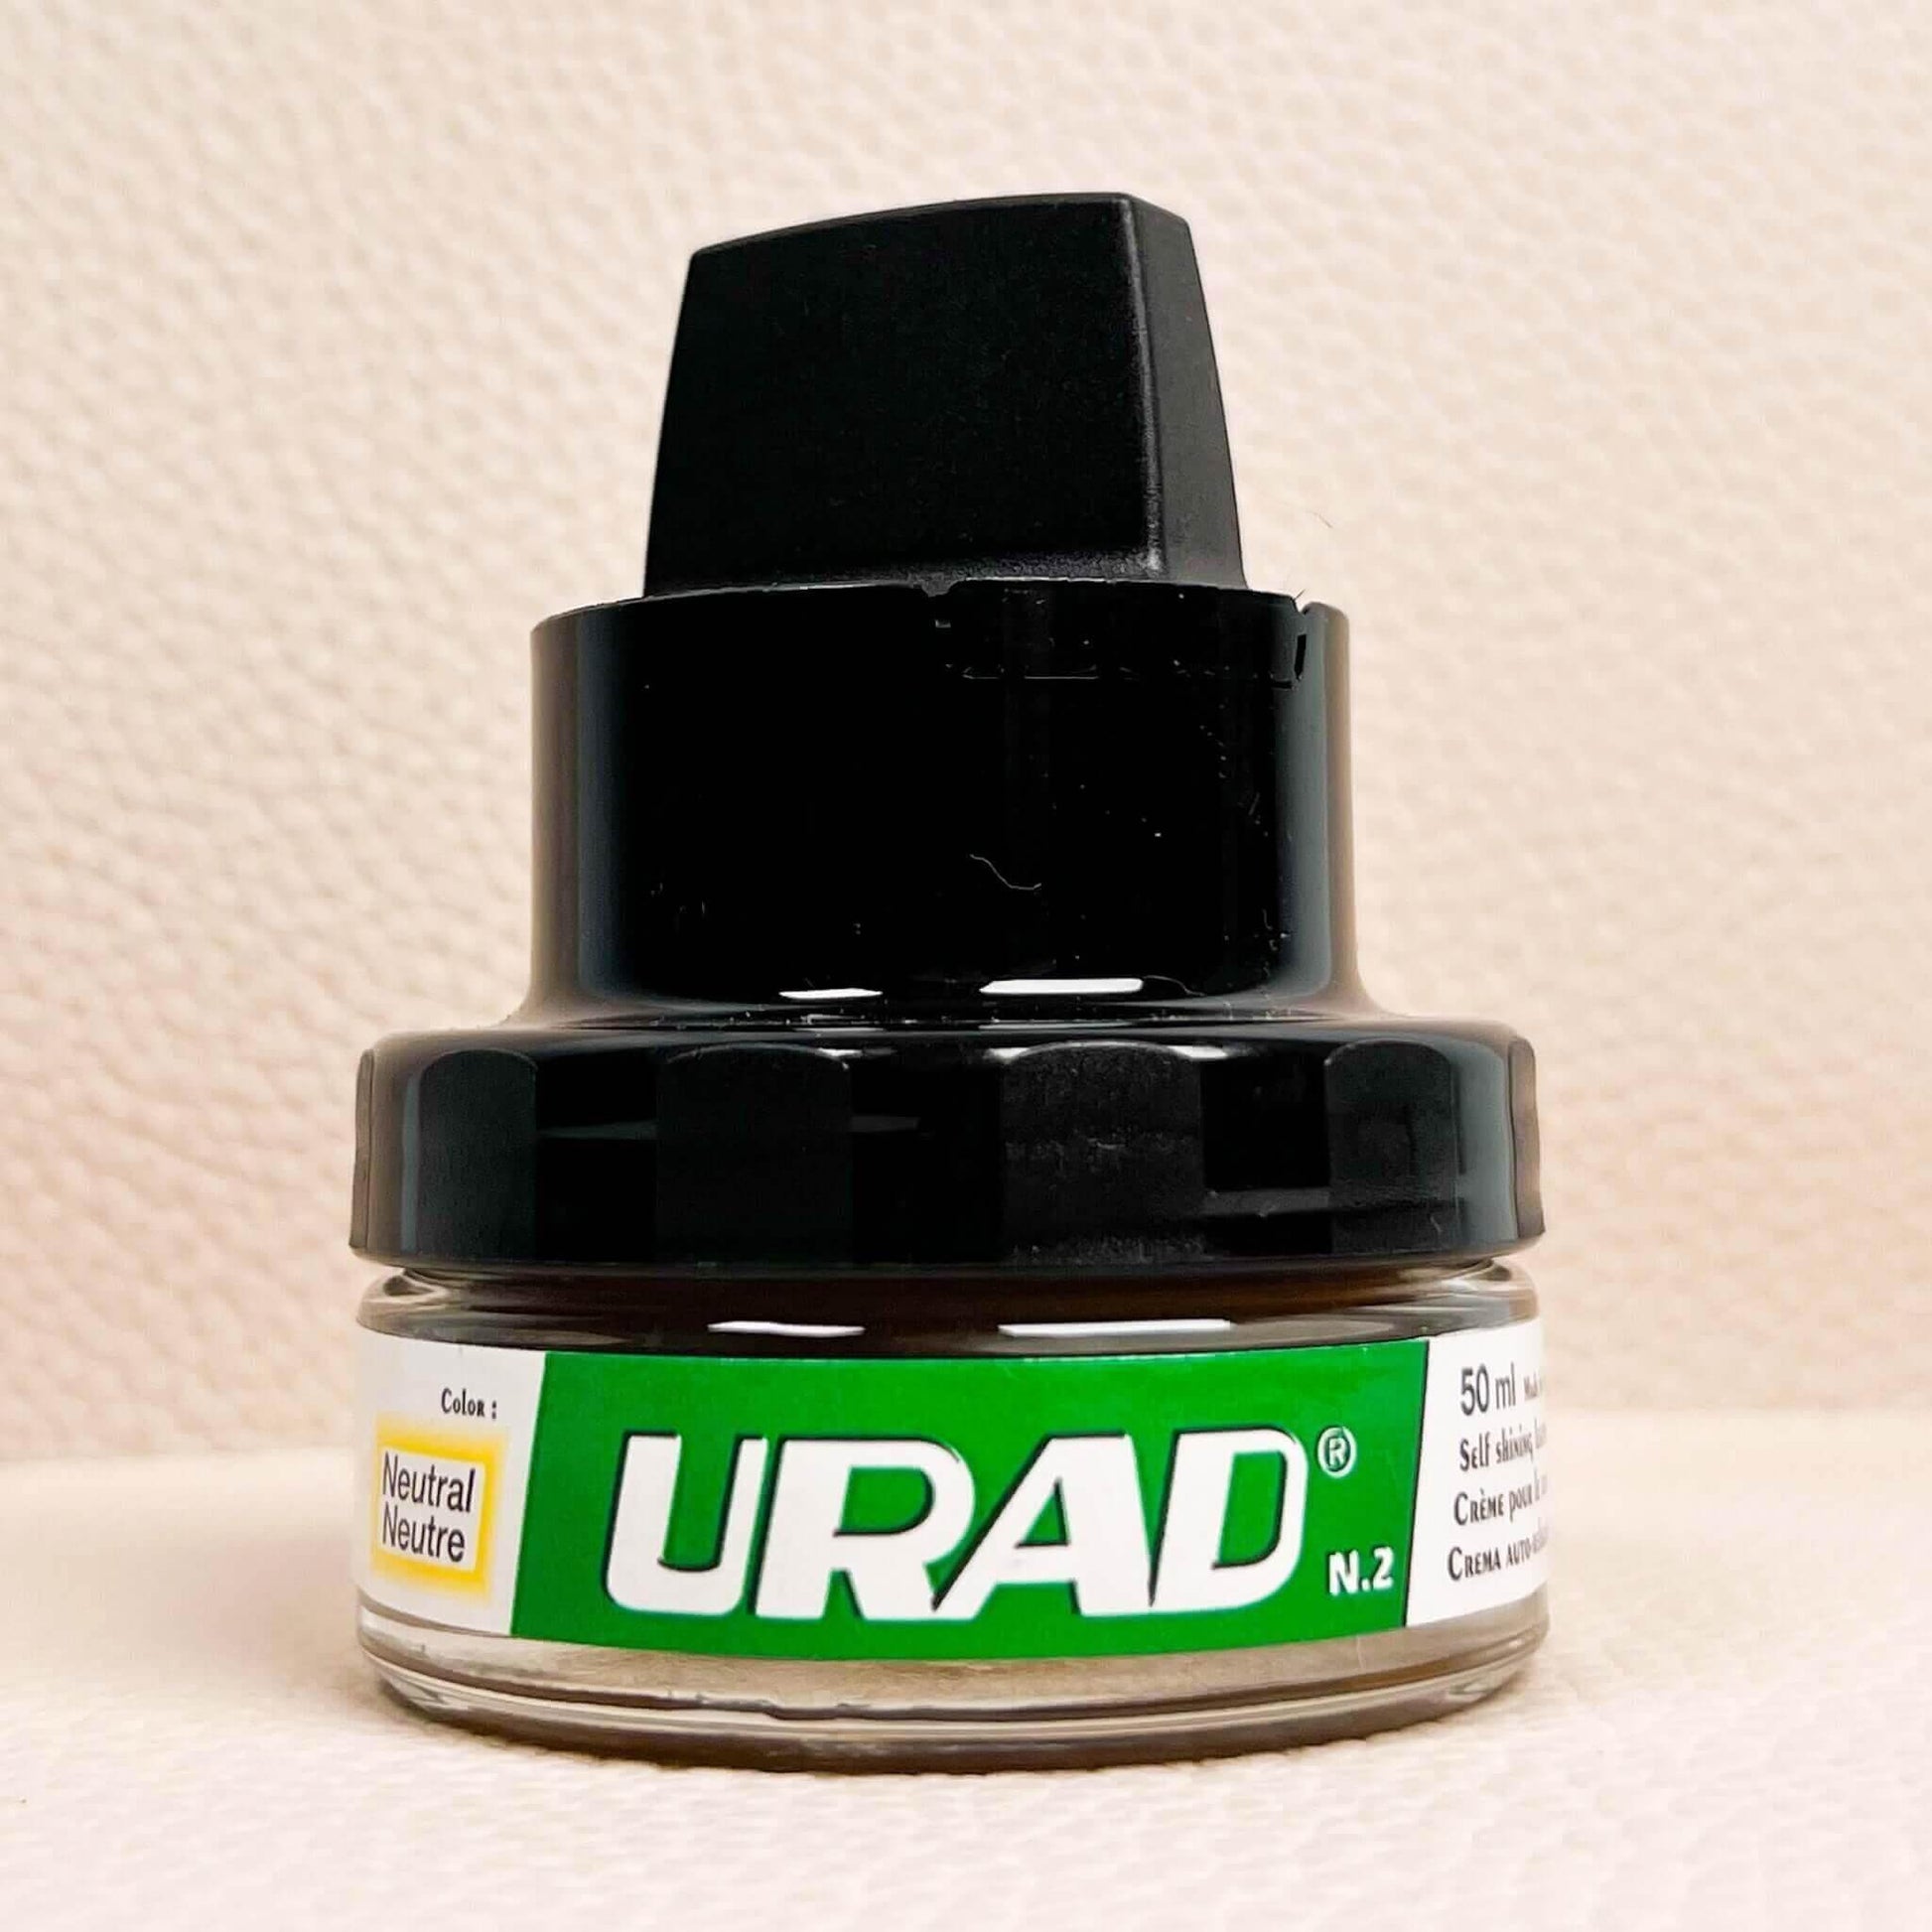 Horse tack requires the best leather conditioner to ensure durability and longevity, and Urad is a top choice for those looking for the best leather conditioner for horse tack.